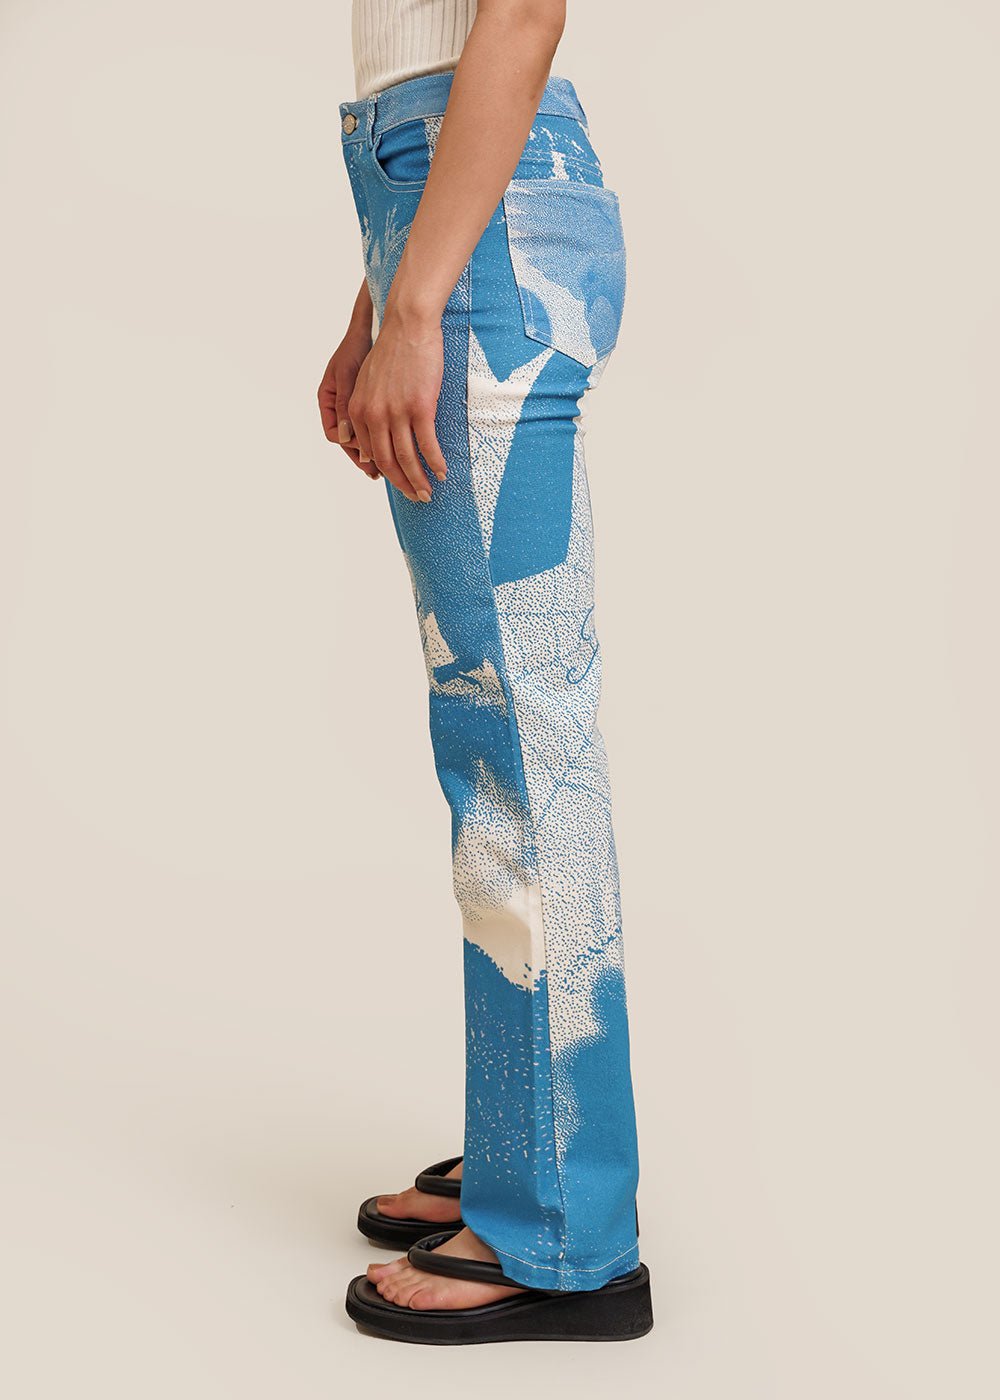 Paloma Wool Visionaire Pants - New Classics Studios Sustainable Ethical Fashion Canada